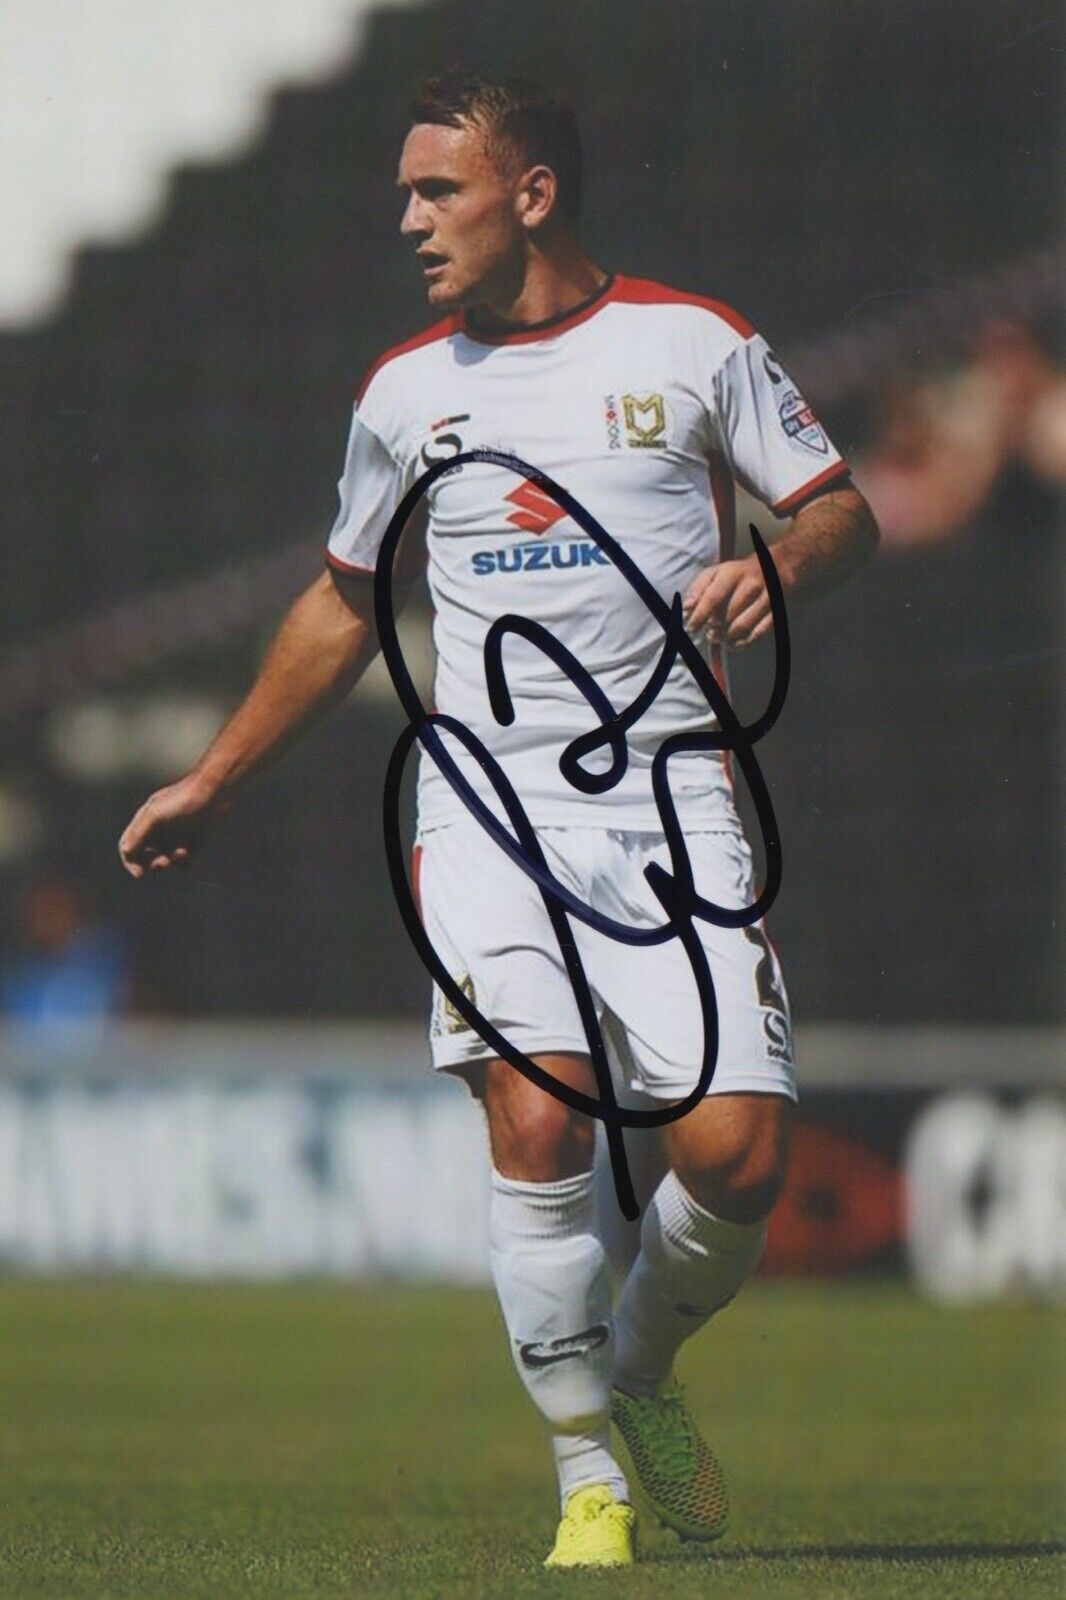 LEE HODSON HAND SIGNED 6X4 Photo Poster painting - FOOTBALL AUTOGRAPH - MK DONS 1.